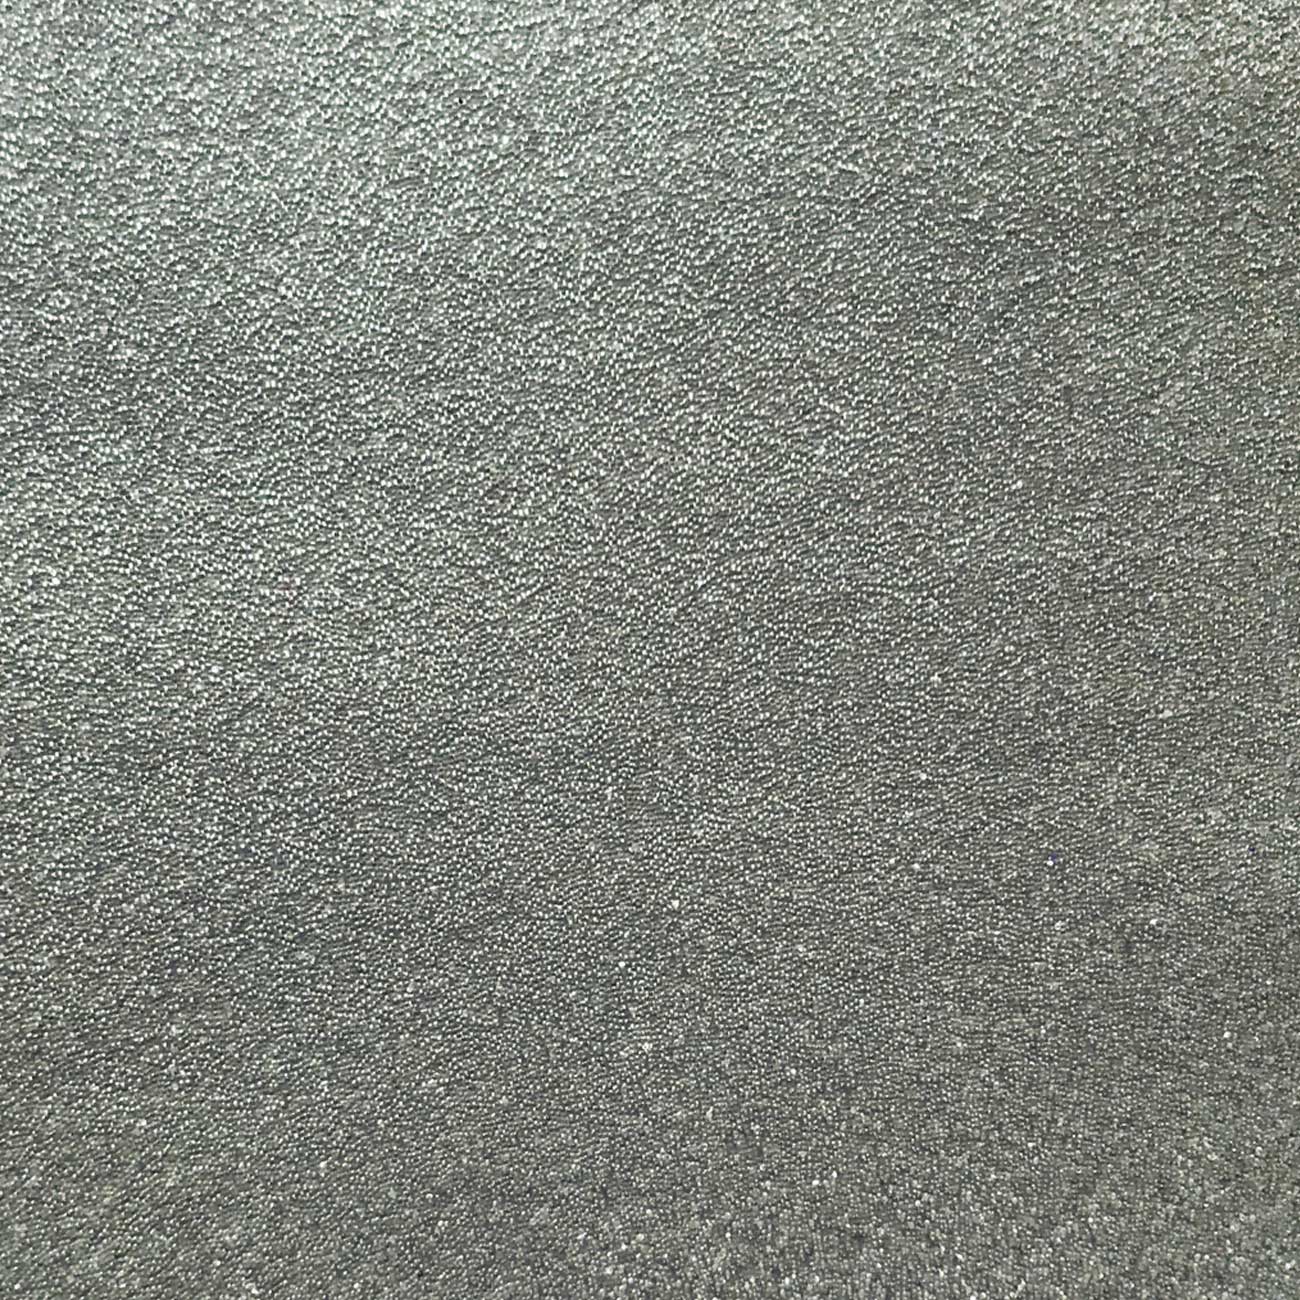 Glass bead wallcovering WallFace CBS16-4 CRYSTAL plain non-woven wallpaper handcrafted with real glass beads glossy silver-gray 9.80 m2 roll